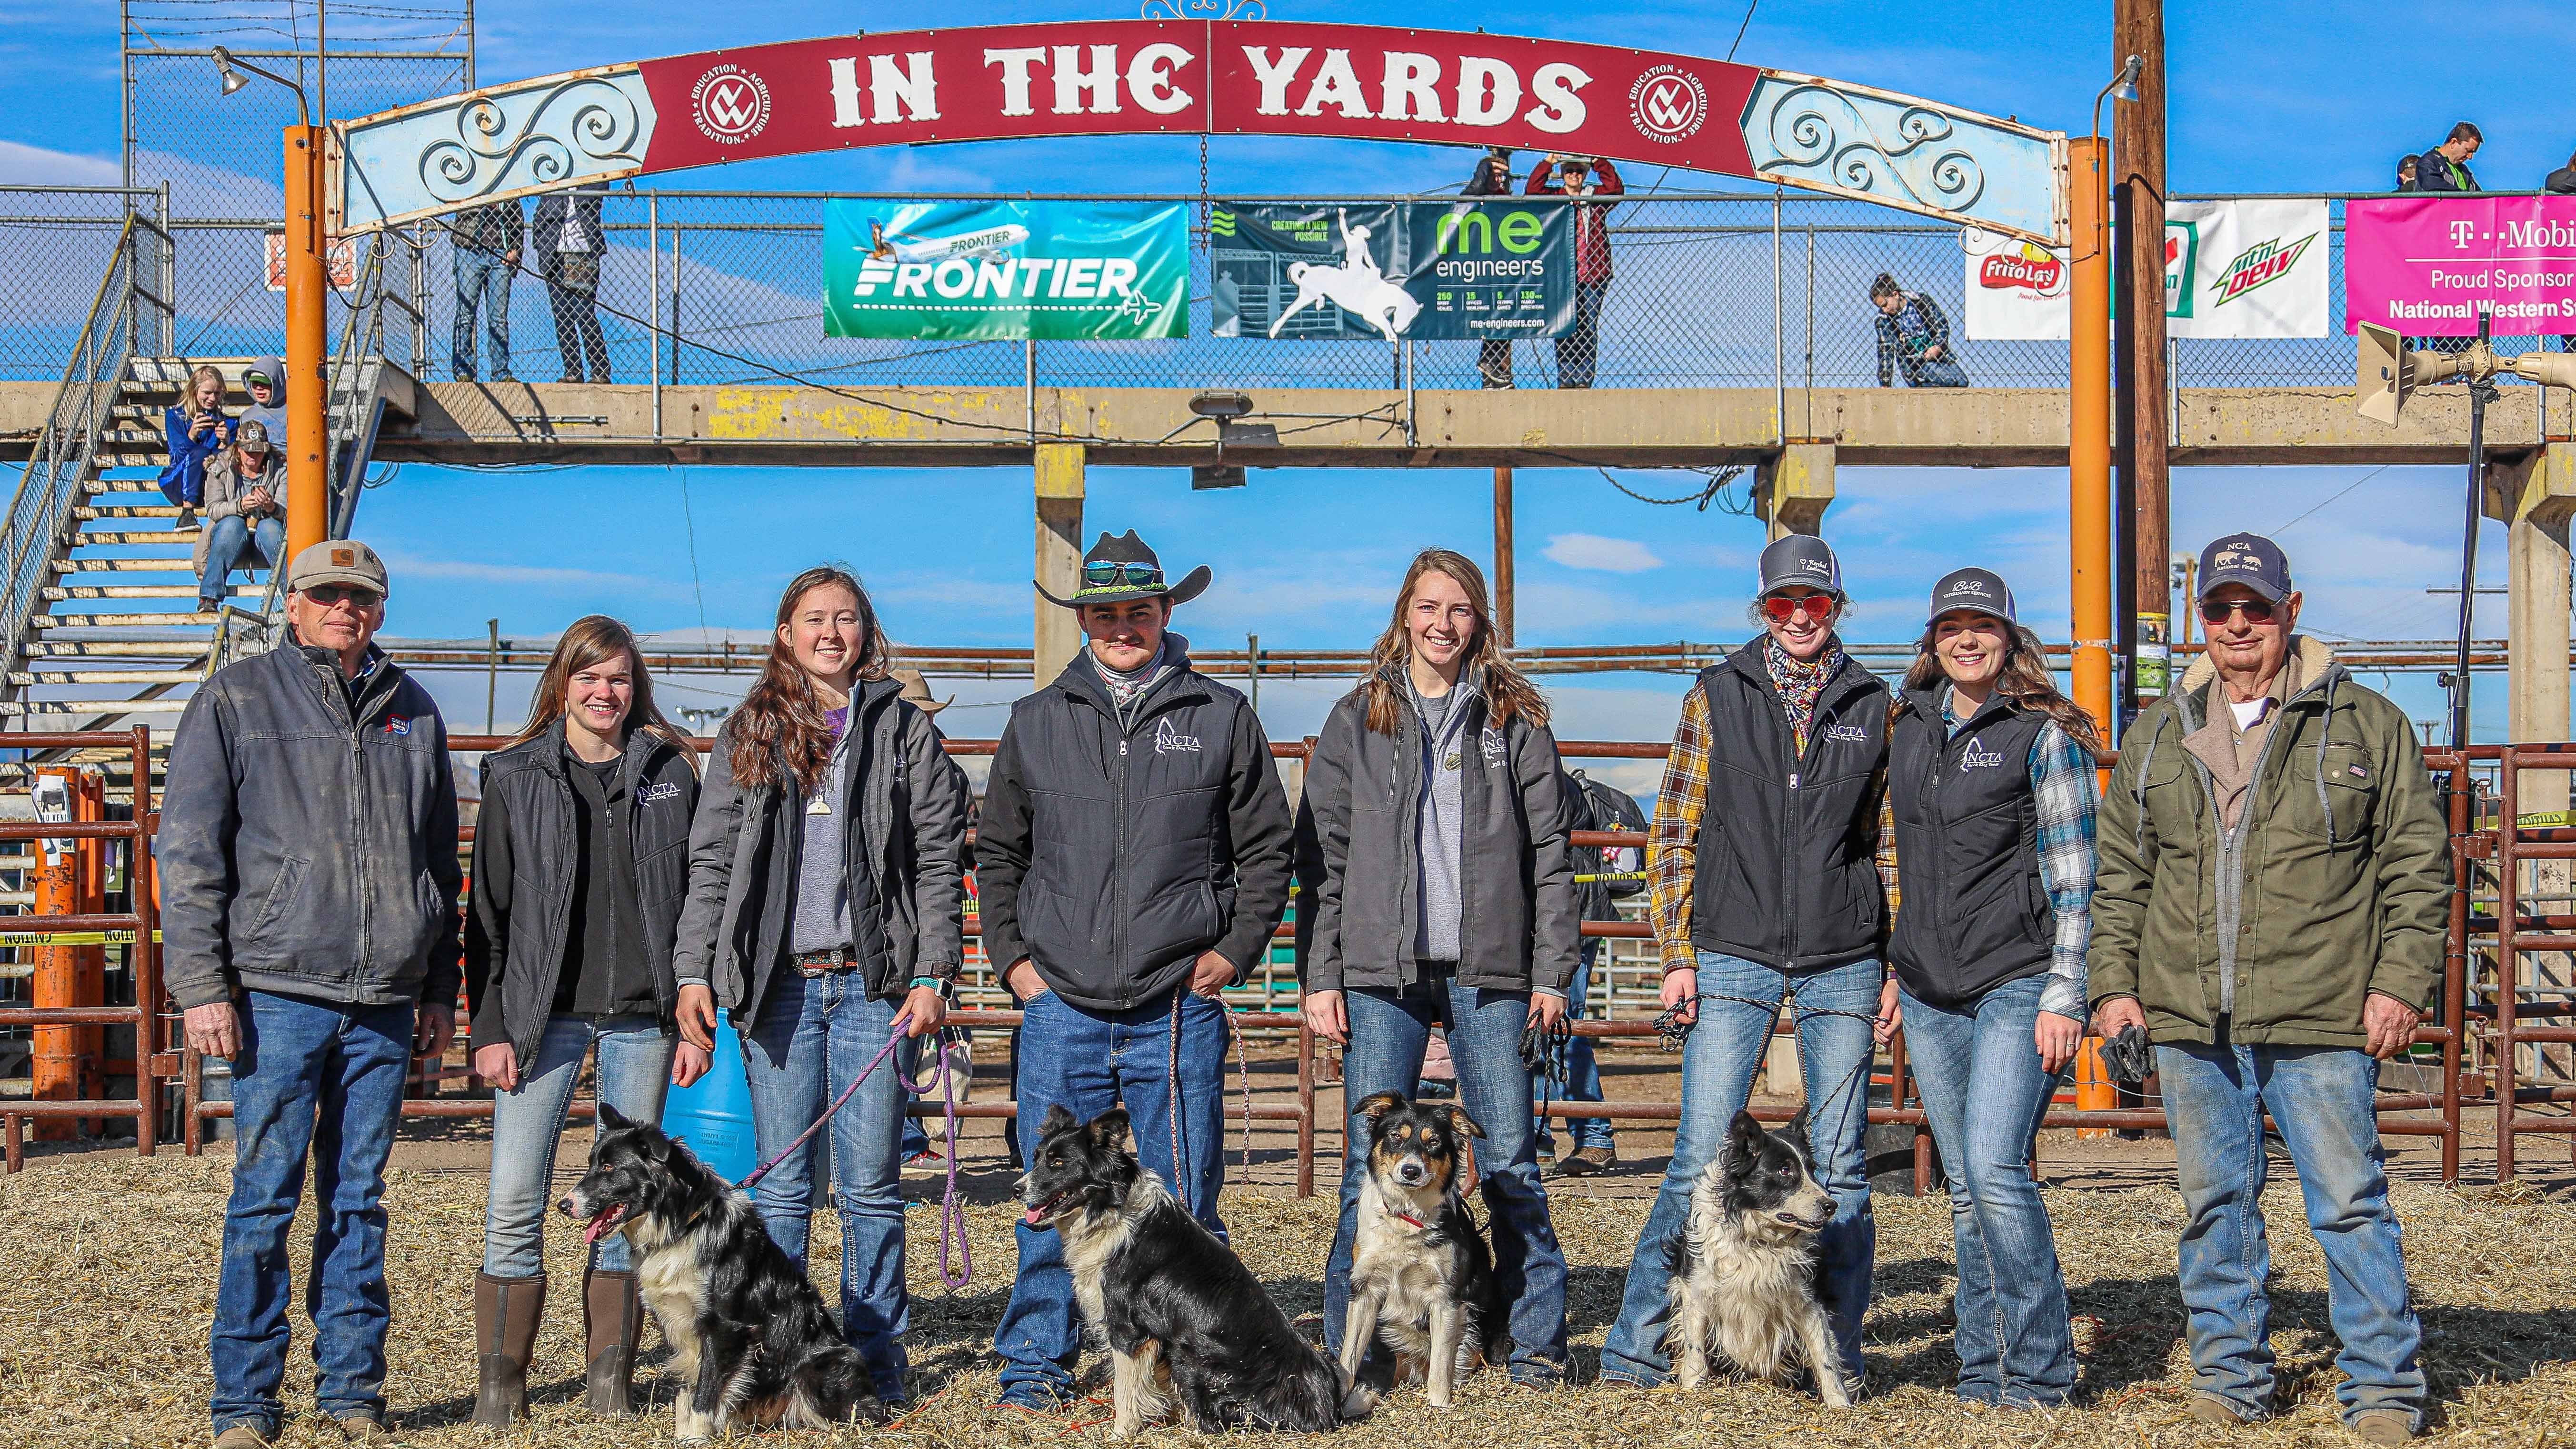 Outback Stock Association leaders and NCTA coaches Kelly Popp of Curtis, far left, and Eddie Merritt of Wellfleet, far right, gather at the National Western Stock Show in Denver with NCTA students Kaytie Henrickson, Breauna Derr, CJ Monheiser, Joli Brown, Alexandra Hazuka, and Emily Hubbell. (Courtesy photo by XP Ranch Photography)